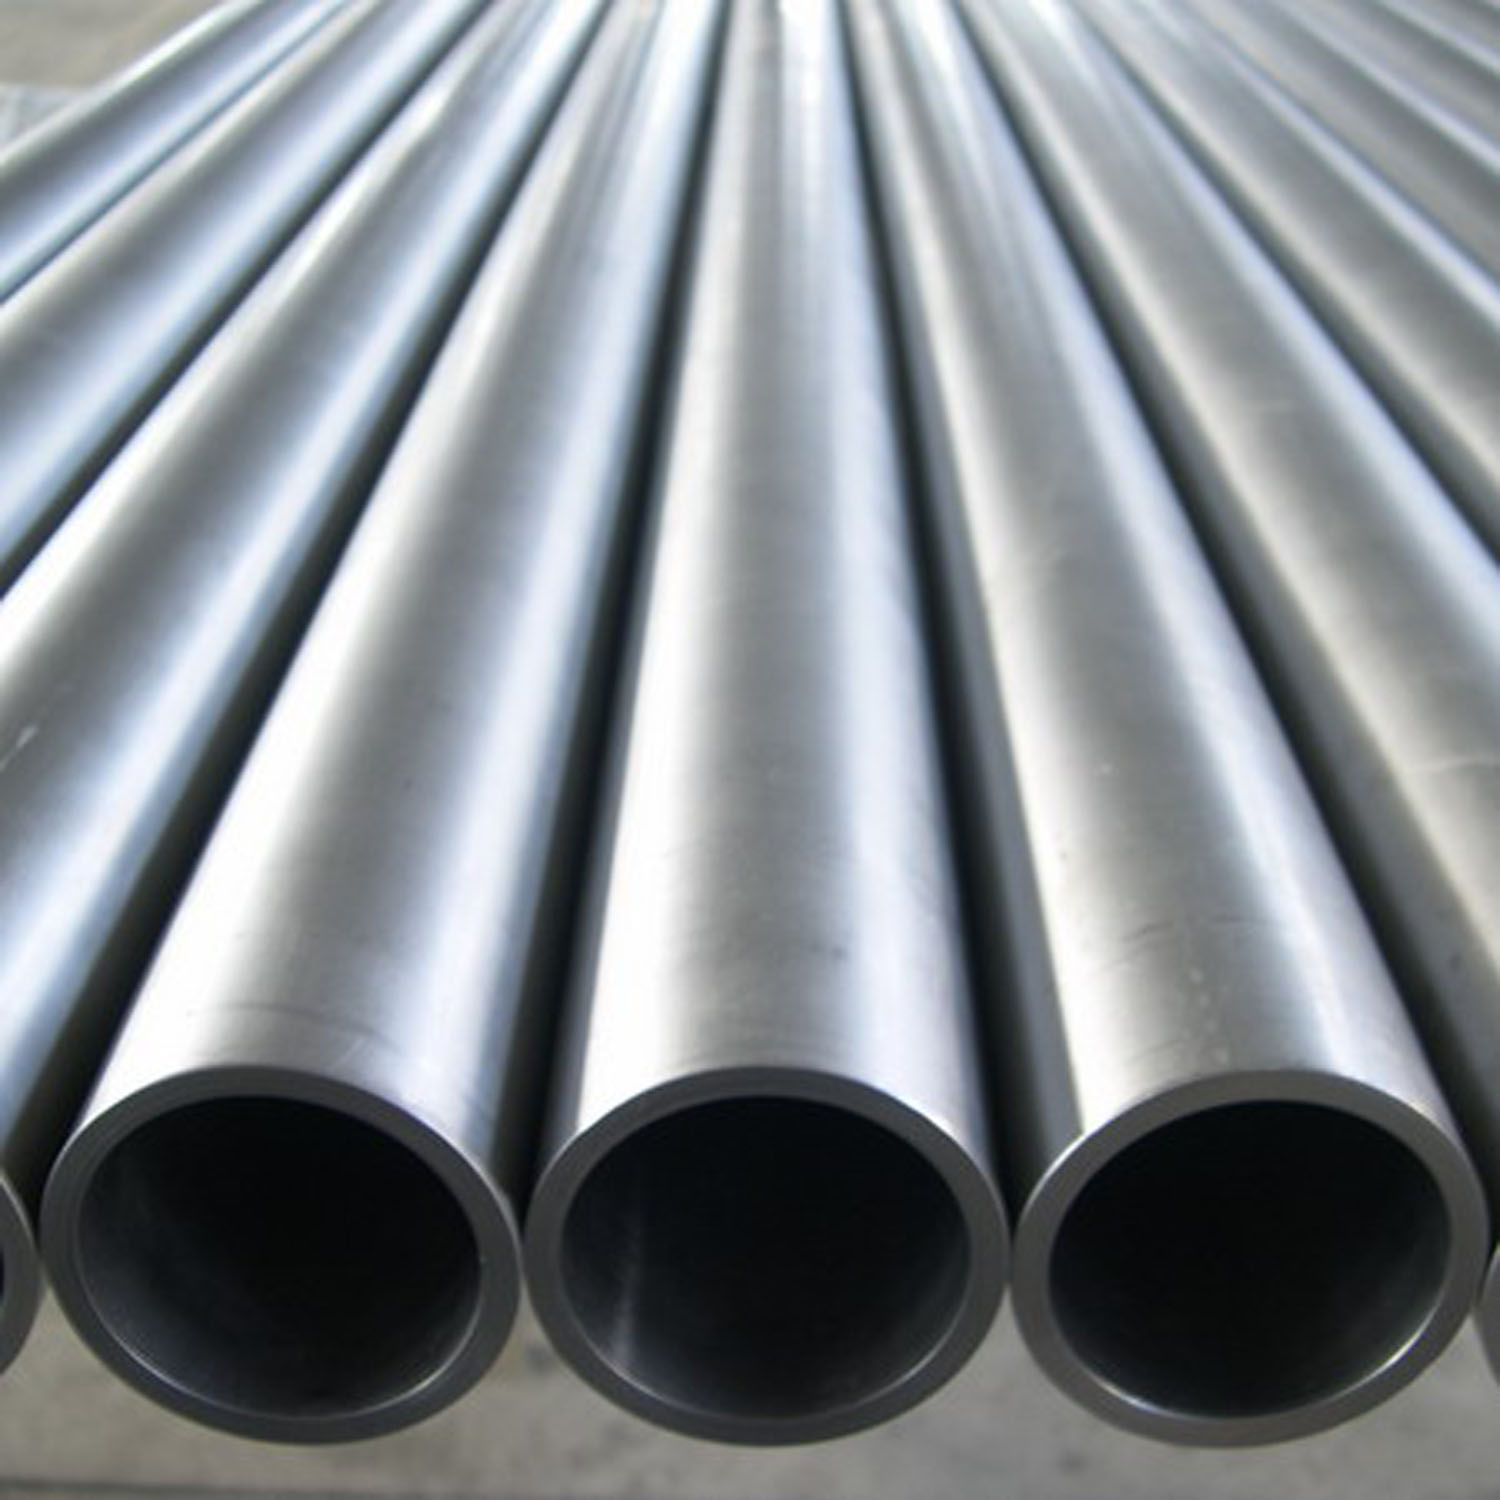 Manufacturers Exporters and Wholesale Suppliers of Seamless Pipes Tubes Mumbai Maharashtra